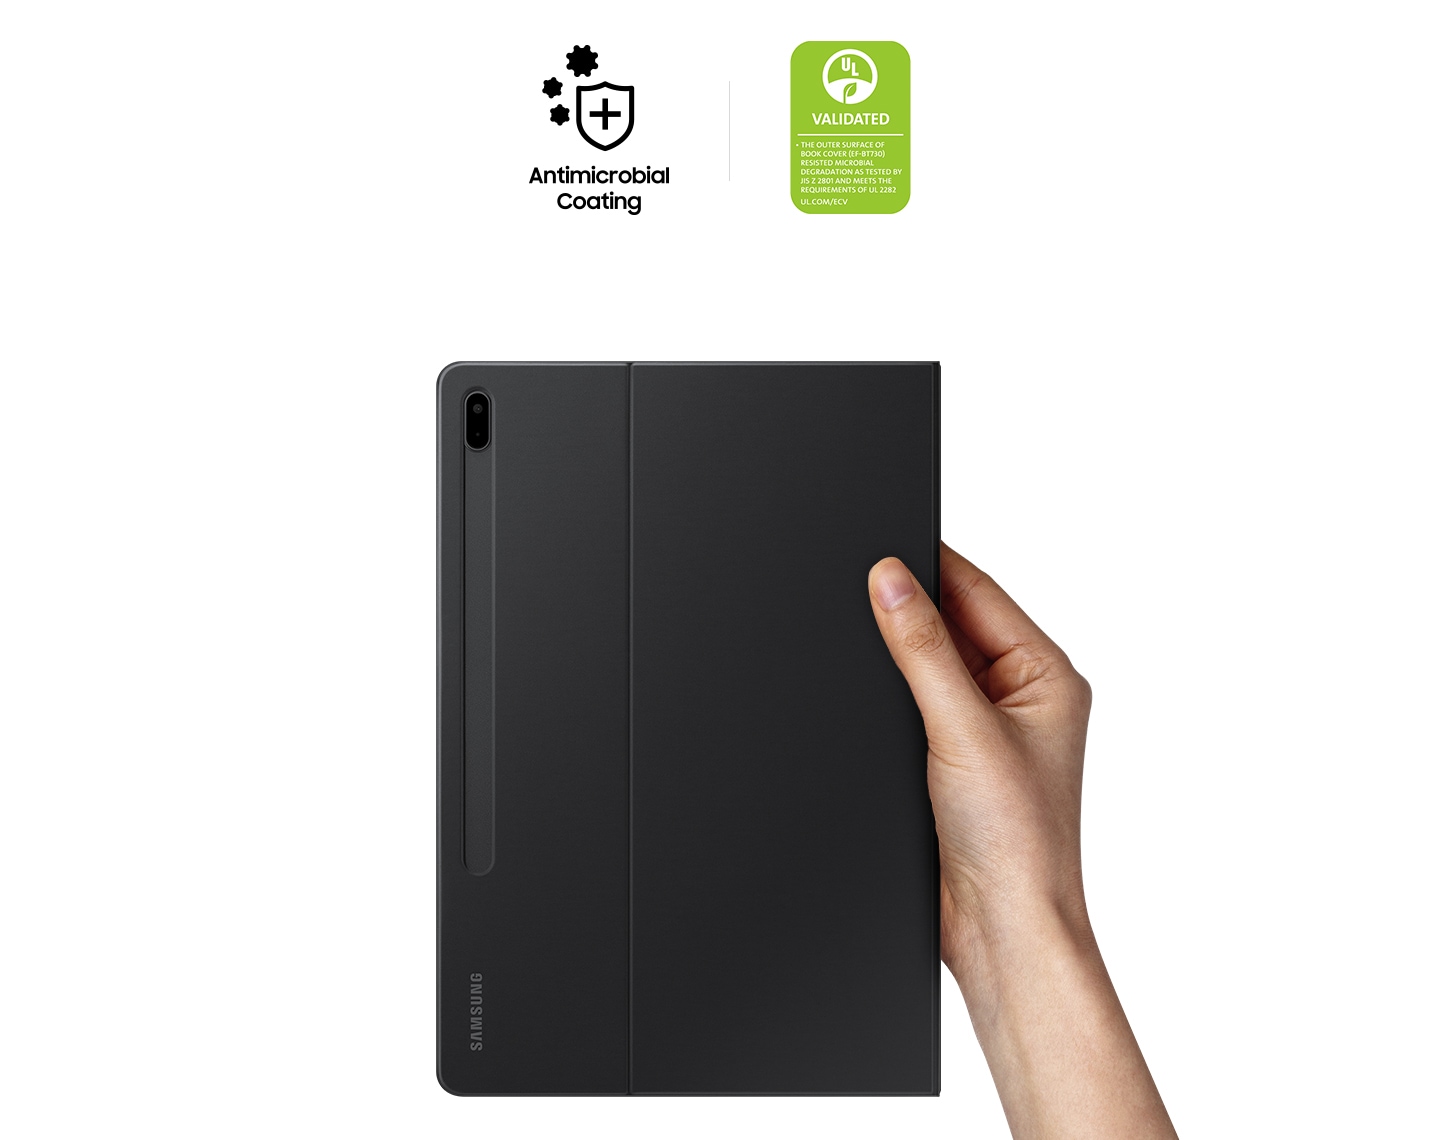 A person holding the Galaxy Tab S7 FE with one hand. you can see the two logos, Antimicrobial Coating and VALIDATED. Text says The outer surface of Book Cover (EF-BT730) resisted microbial degradation as tested by JIS Z 2801 and meets the requirements of UL 2282 UL.COM/ECV.